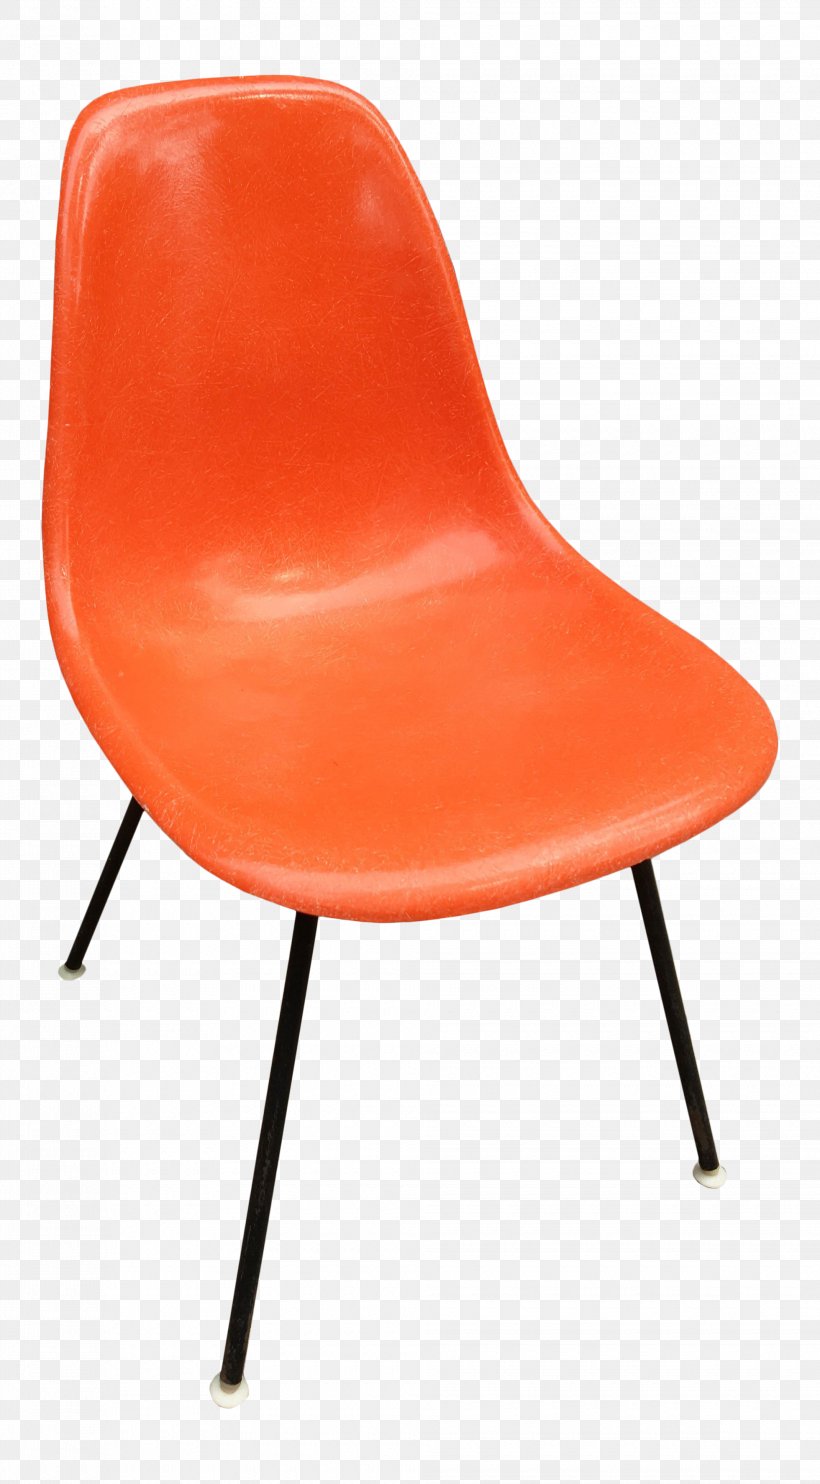 Chair Plastic, PNG, 1960x3548px, Chair, Furniture, Orange, Plastic Download Free